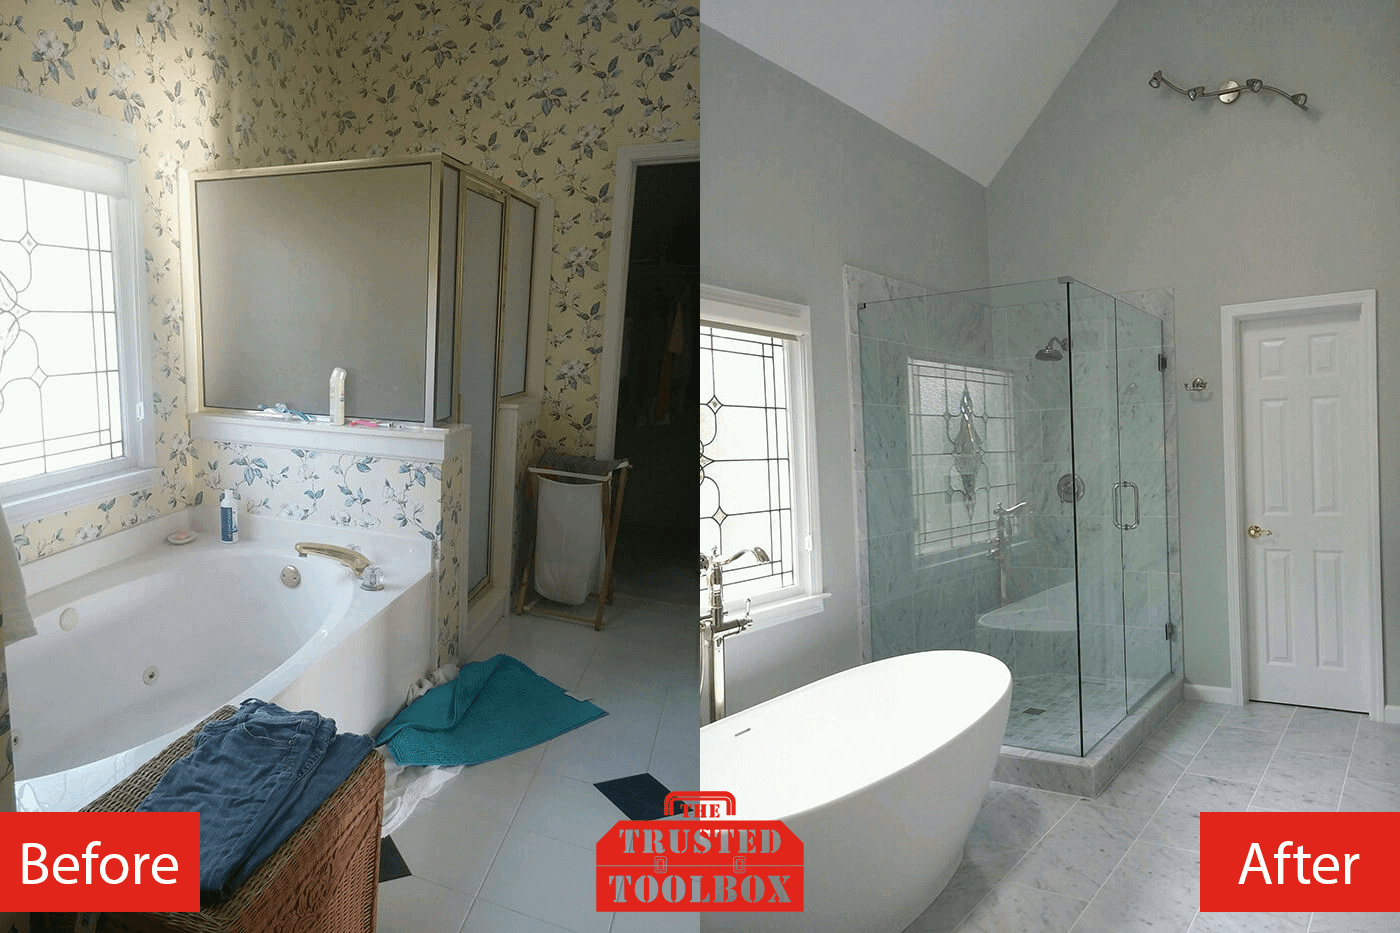 Kitchen And Bathroom Remodeling Portfolio - Before And After Pictures